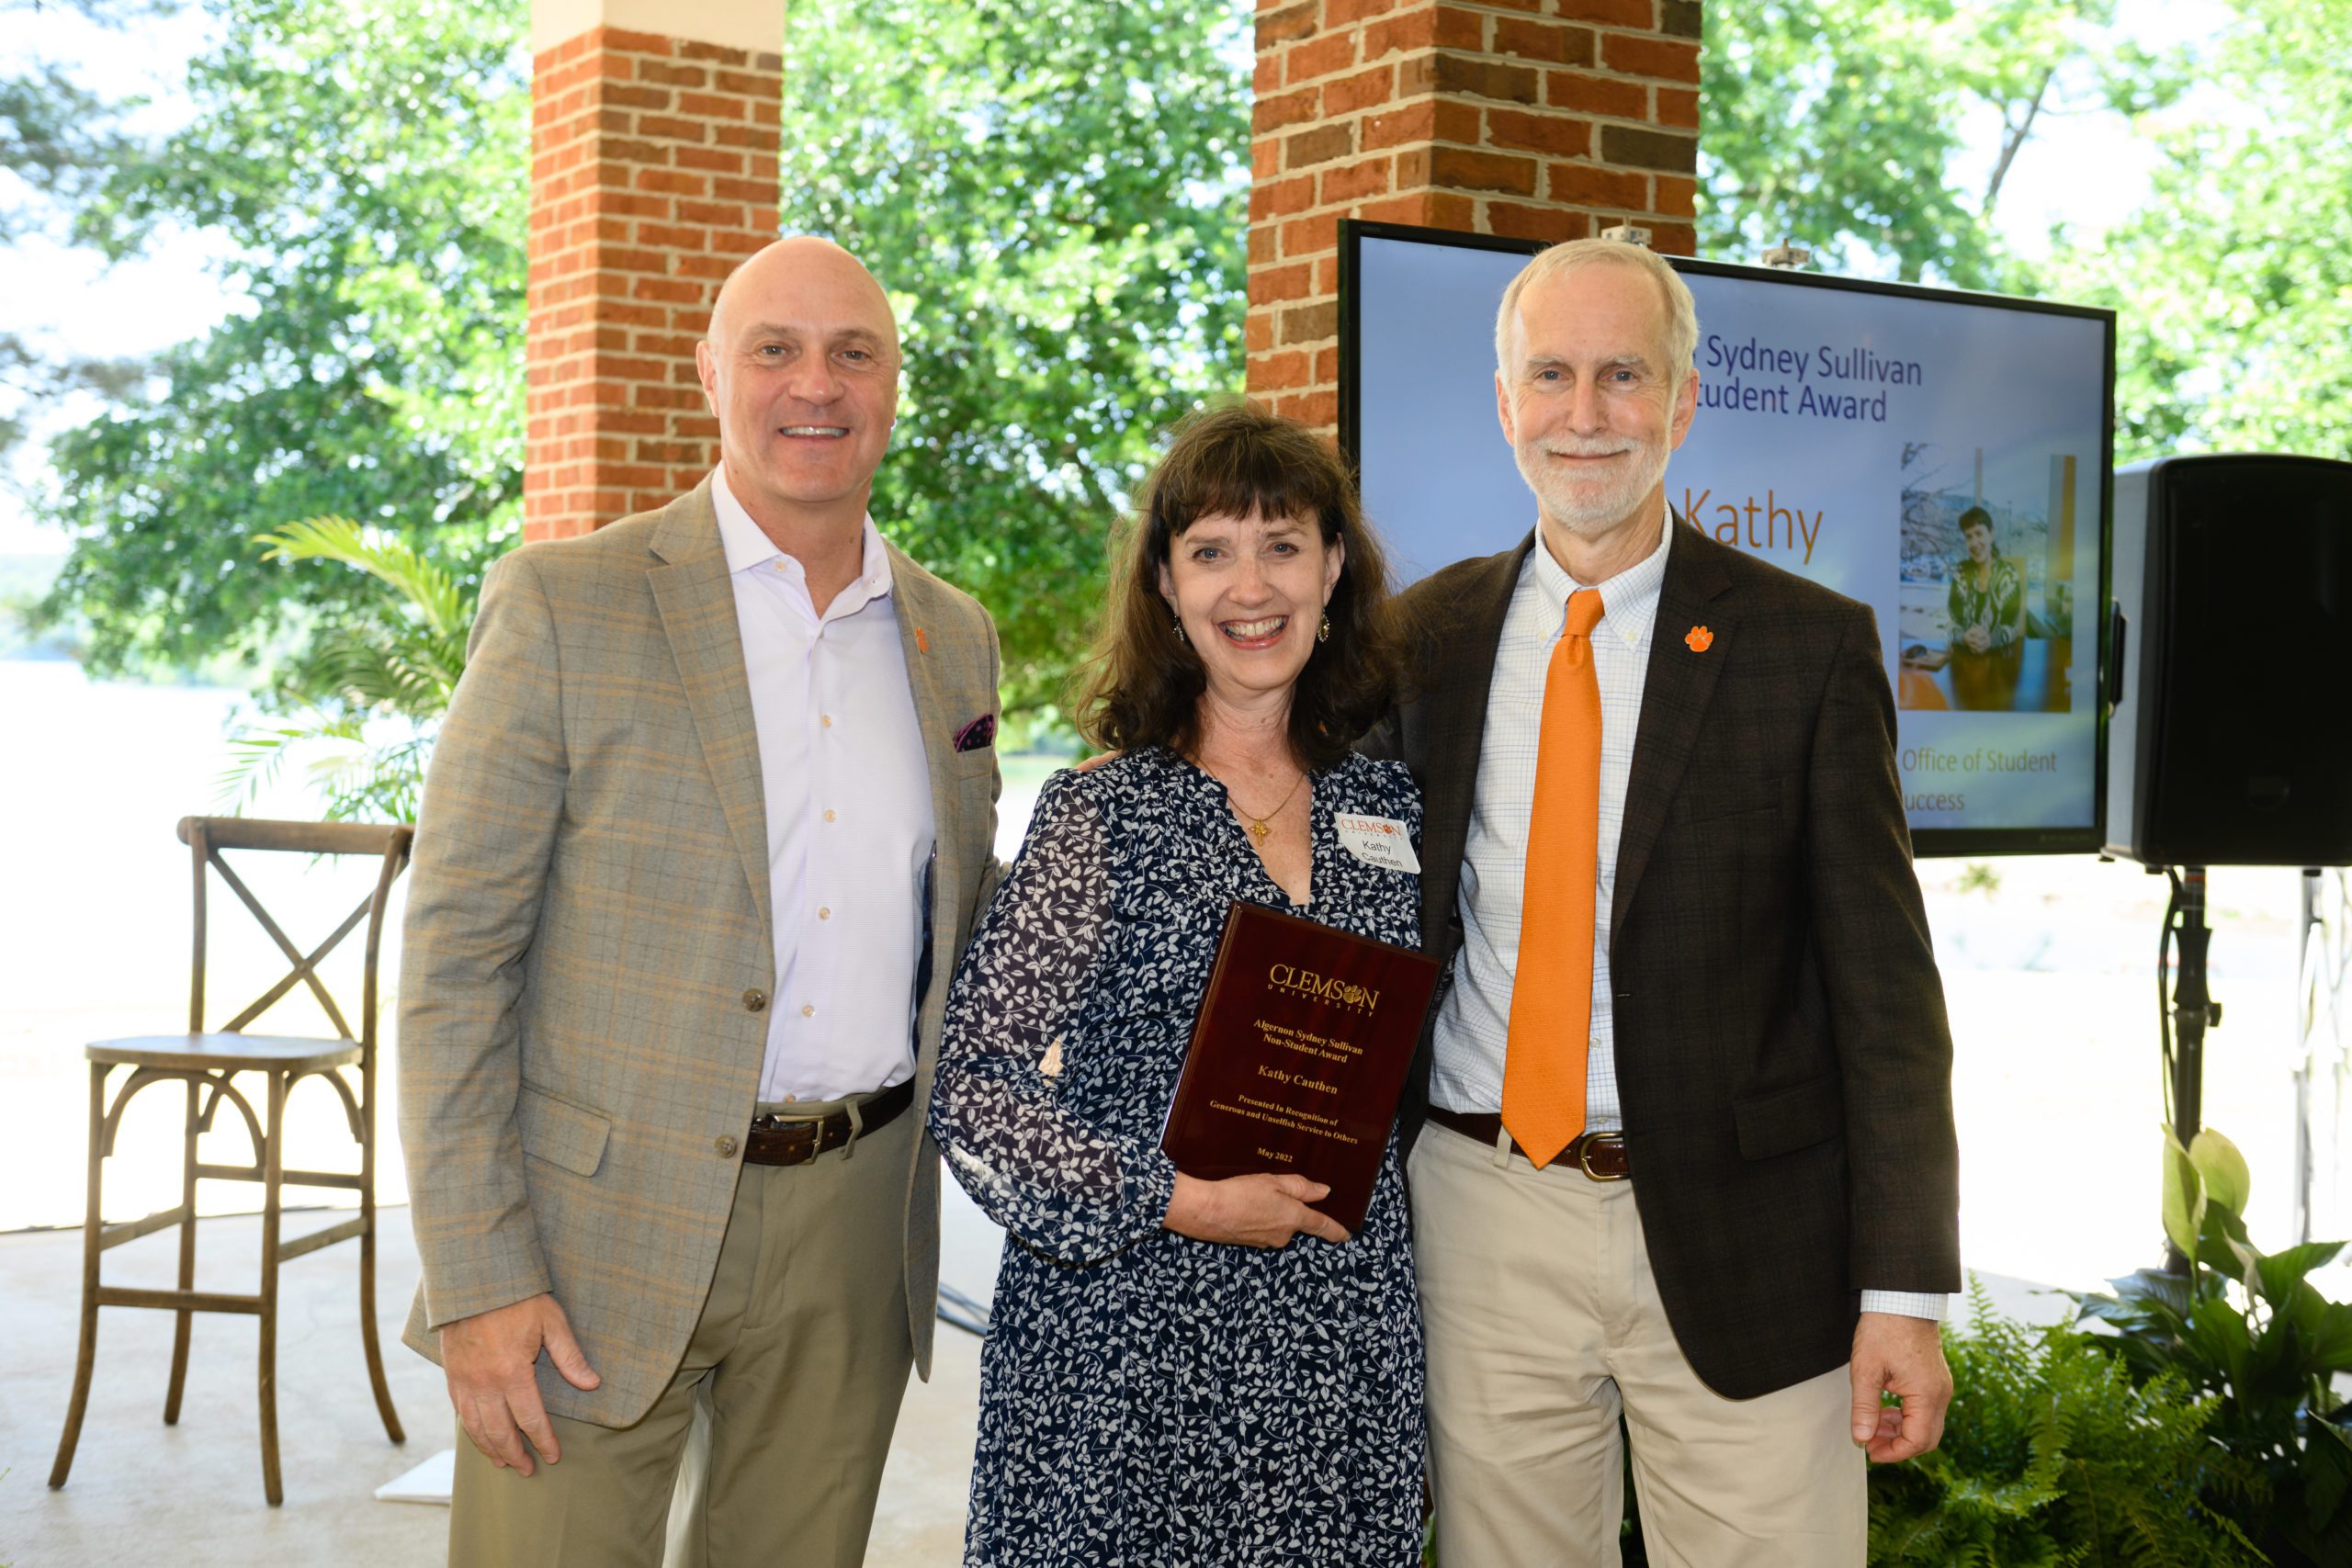 Kathy Cauthen received the Algernon Sydney Sullivan Award in 2022 from President Jim Clements, left, and Provost Bob Jones, right